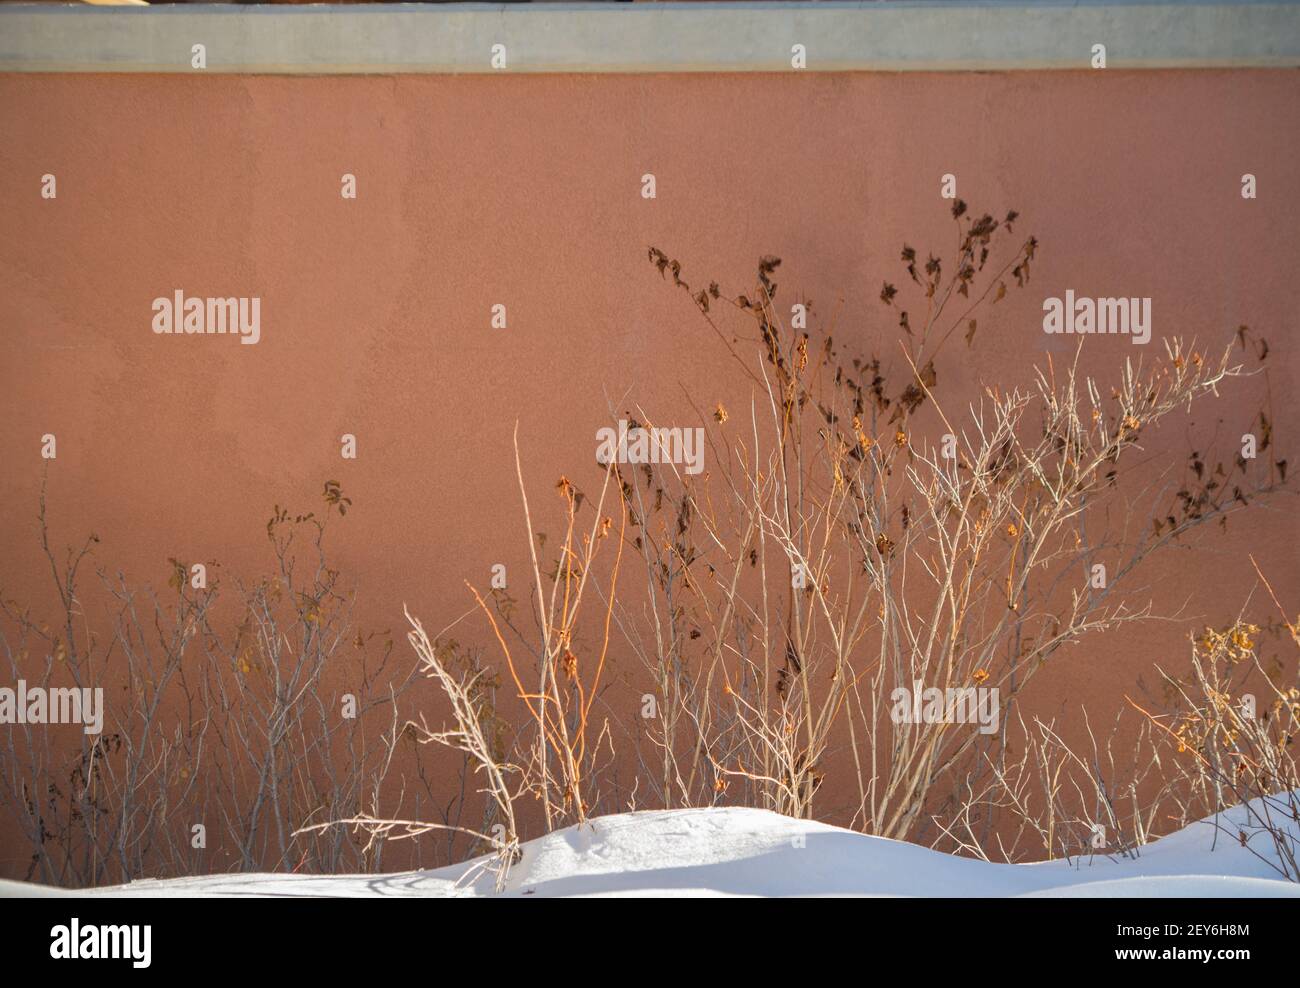 garden plant in winter dried flowers against painted concrete wall of home exterior snow at base of bush dried branches horizontal formatroom for type Stock Photo